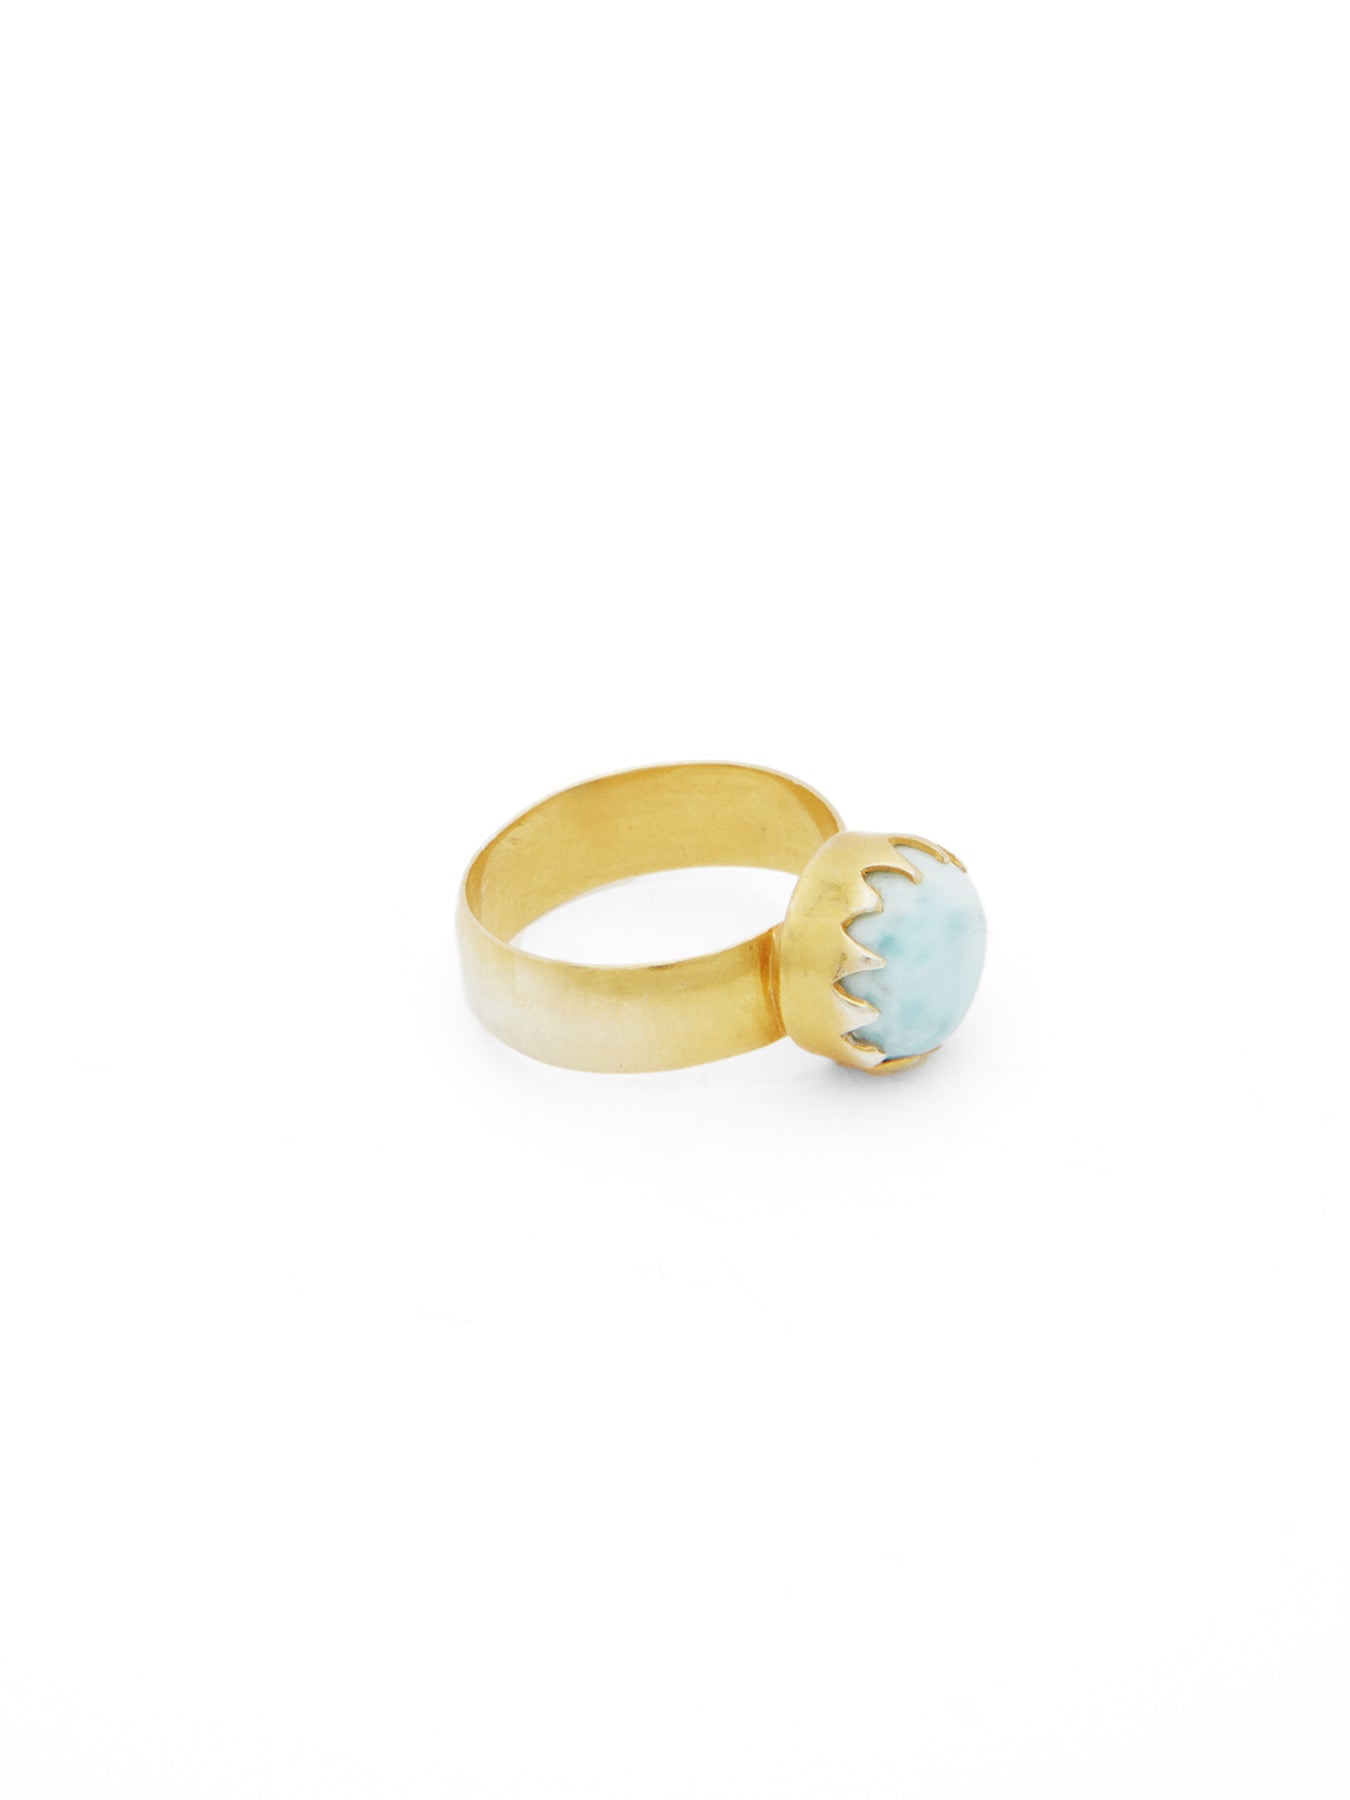 The Apple Of My Eye Ring - Blue